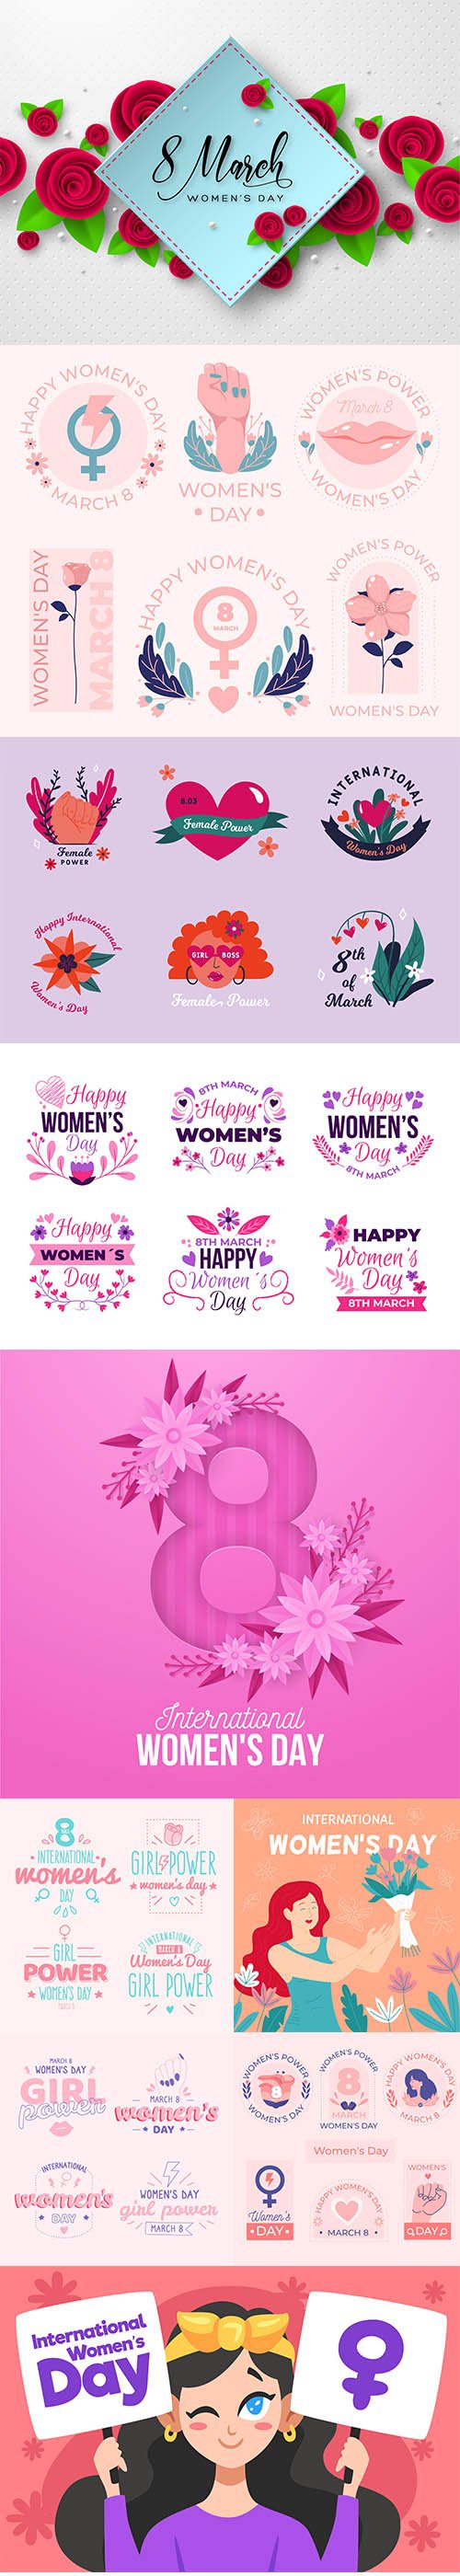 Hand-drawn international womens day illustration and badge collection